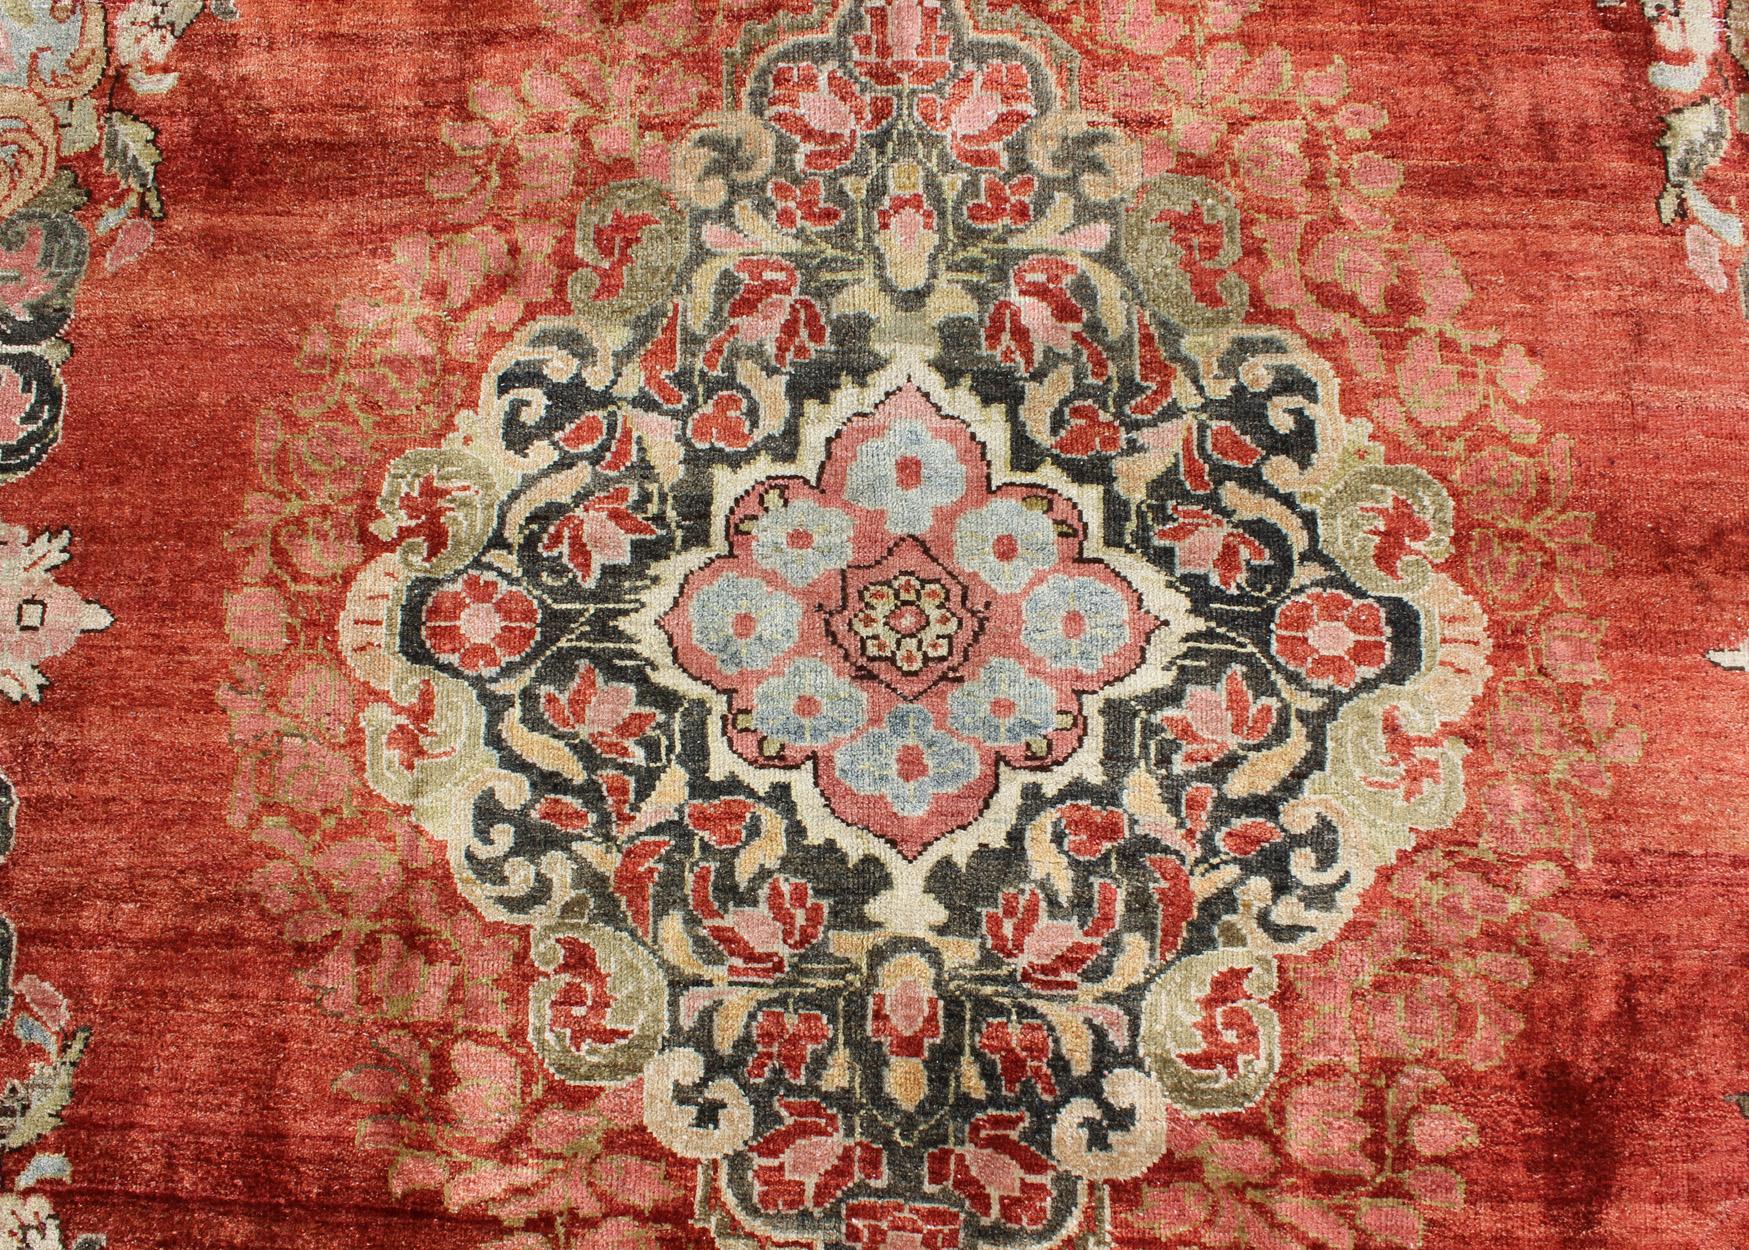  Persian Antique Mahal Rug with Beautiful Floral Design in Red, Pink, and Green  For Sale 5